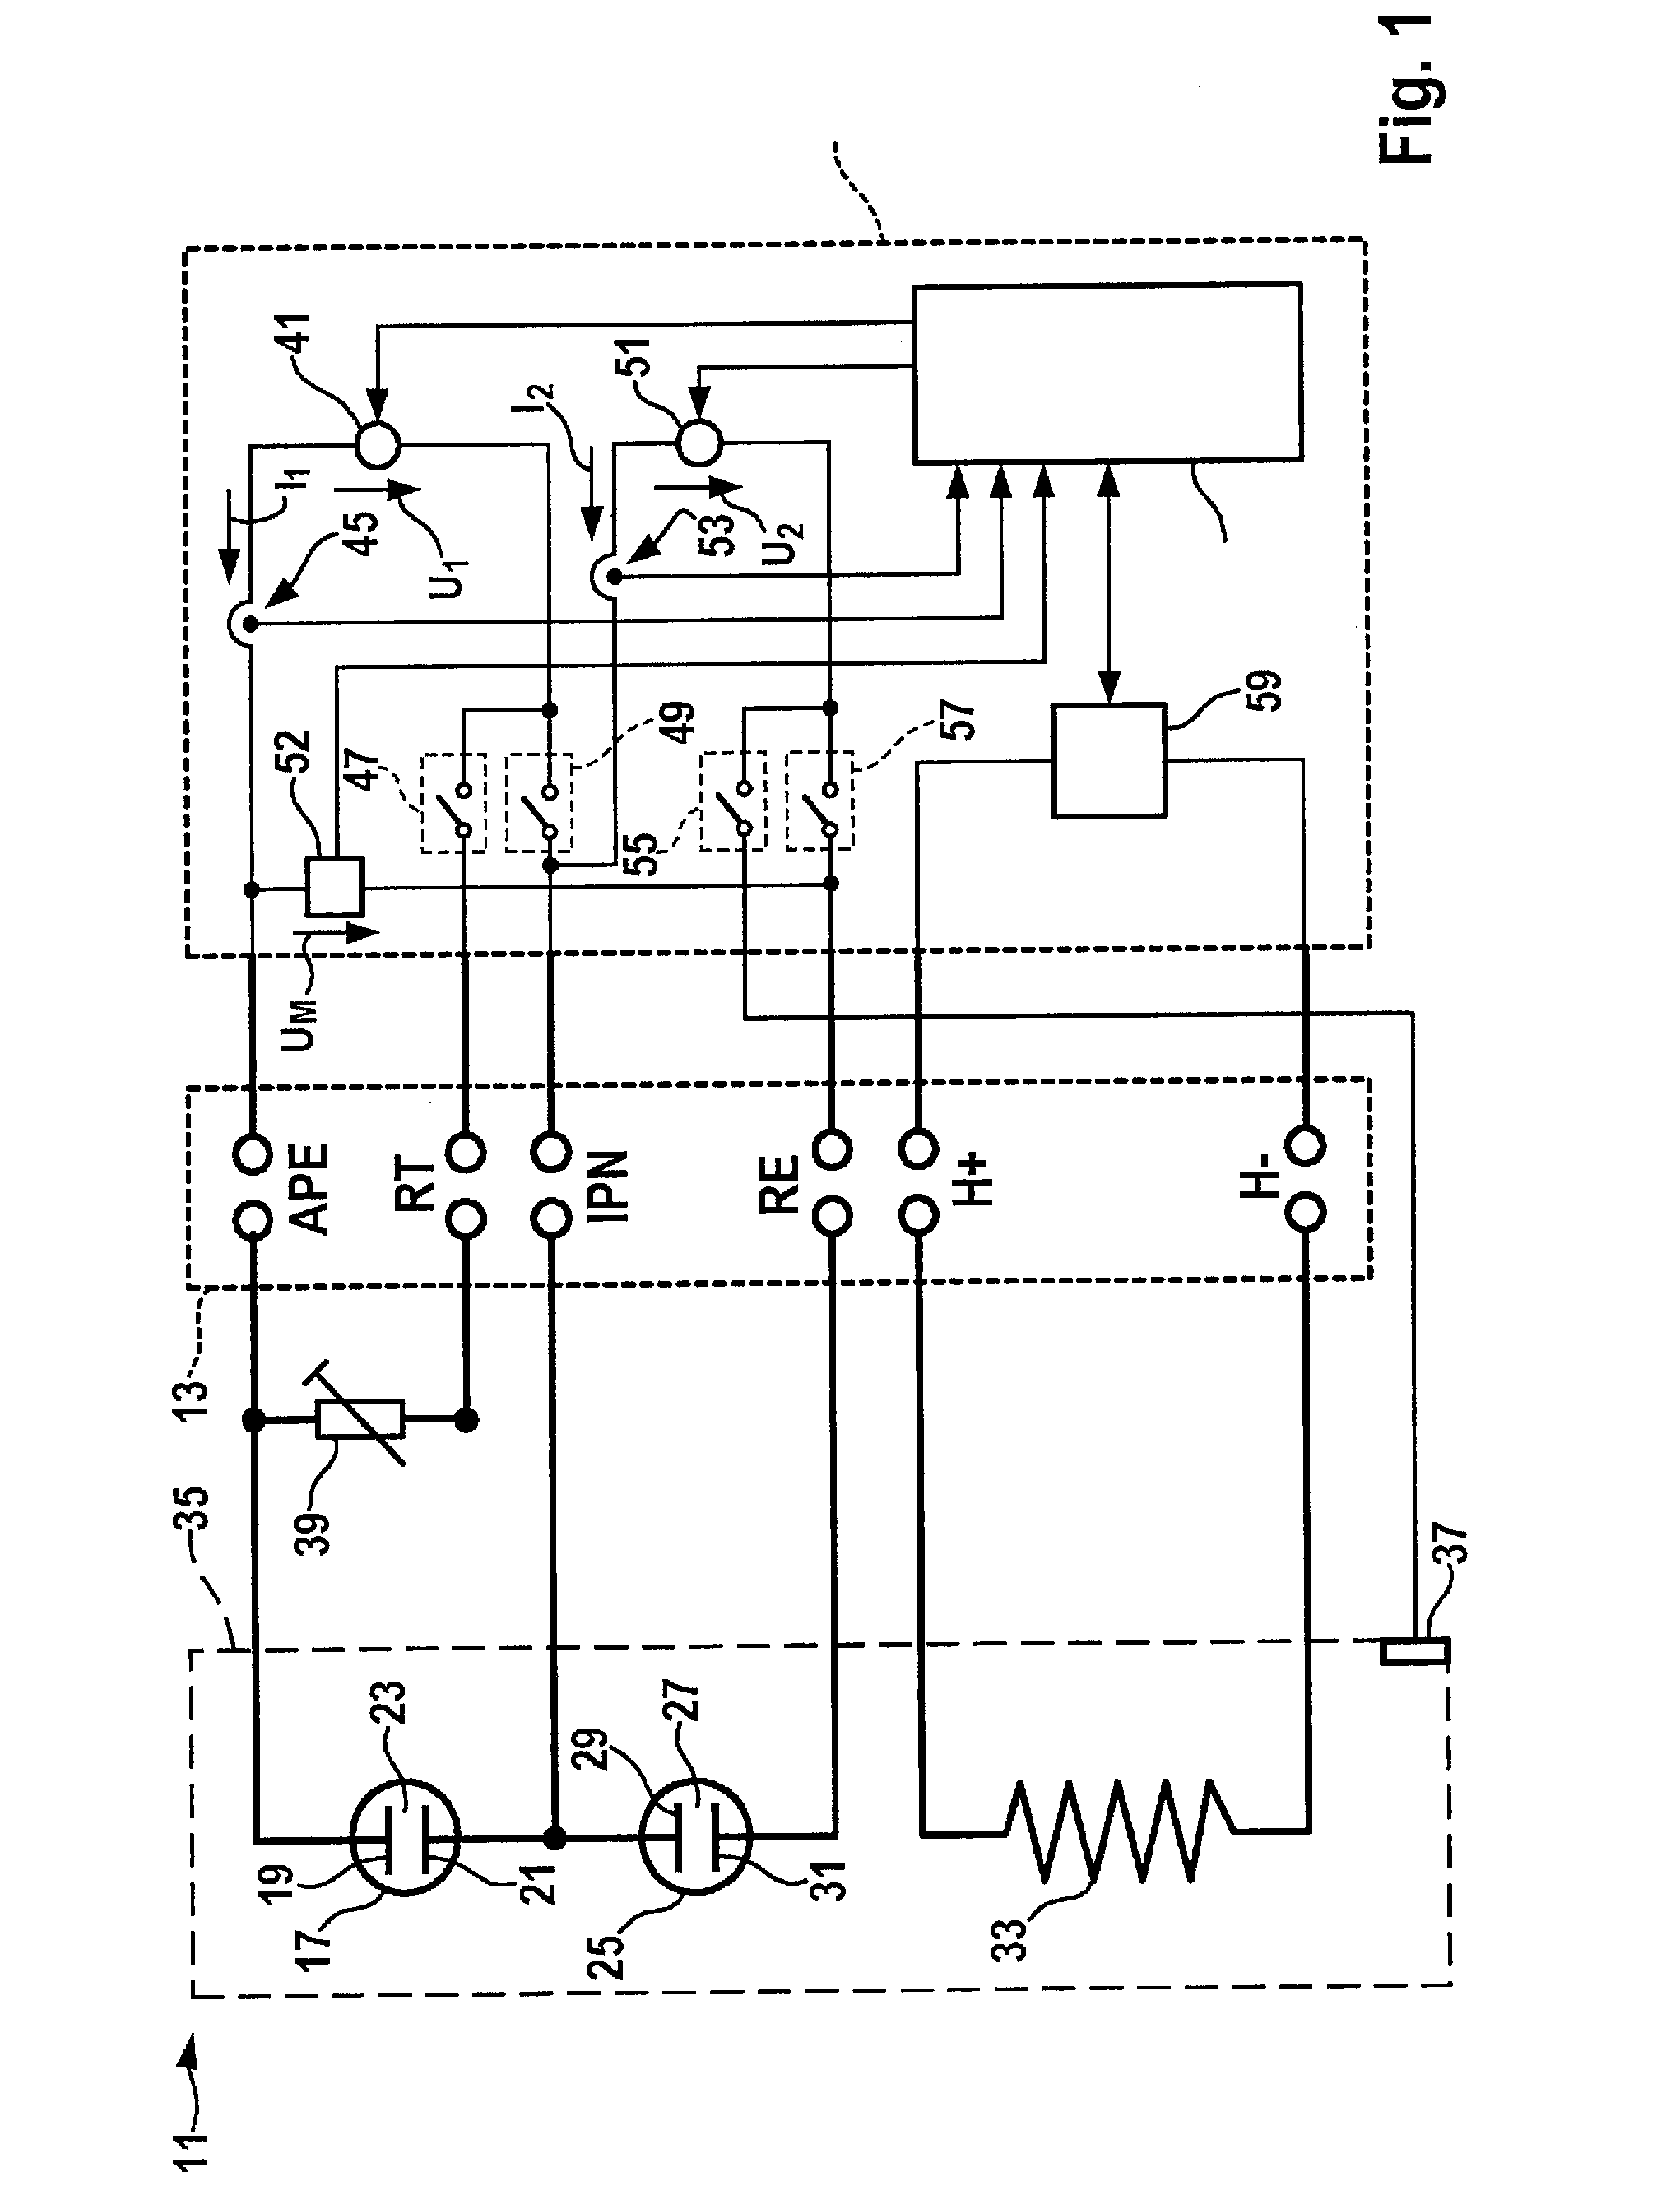 Method and Diagnostic Device for Diagnosing a Heatable Exhaust Gas Sensor of an Internal Combustion Engine